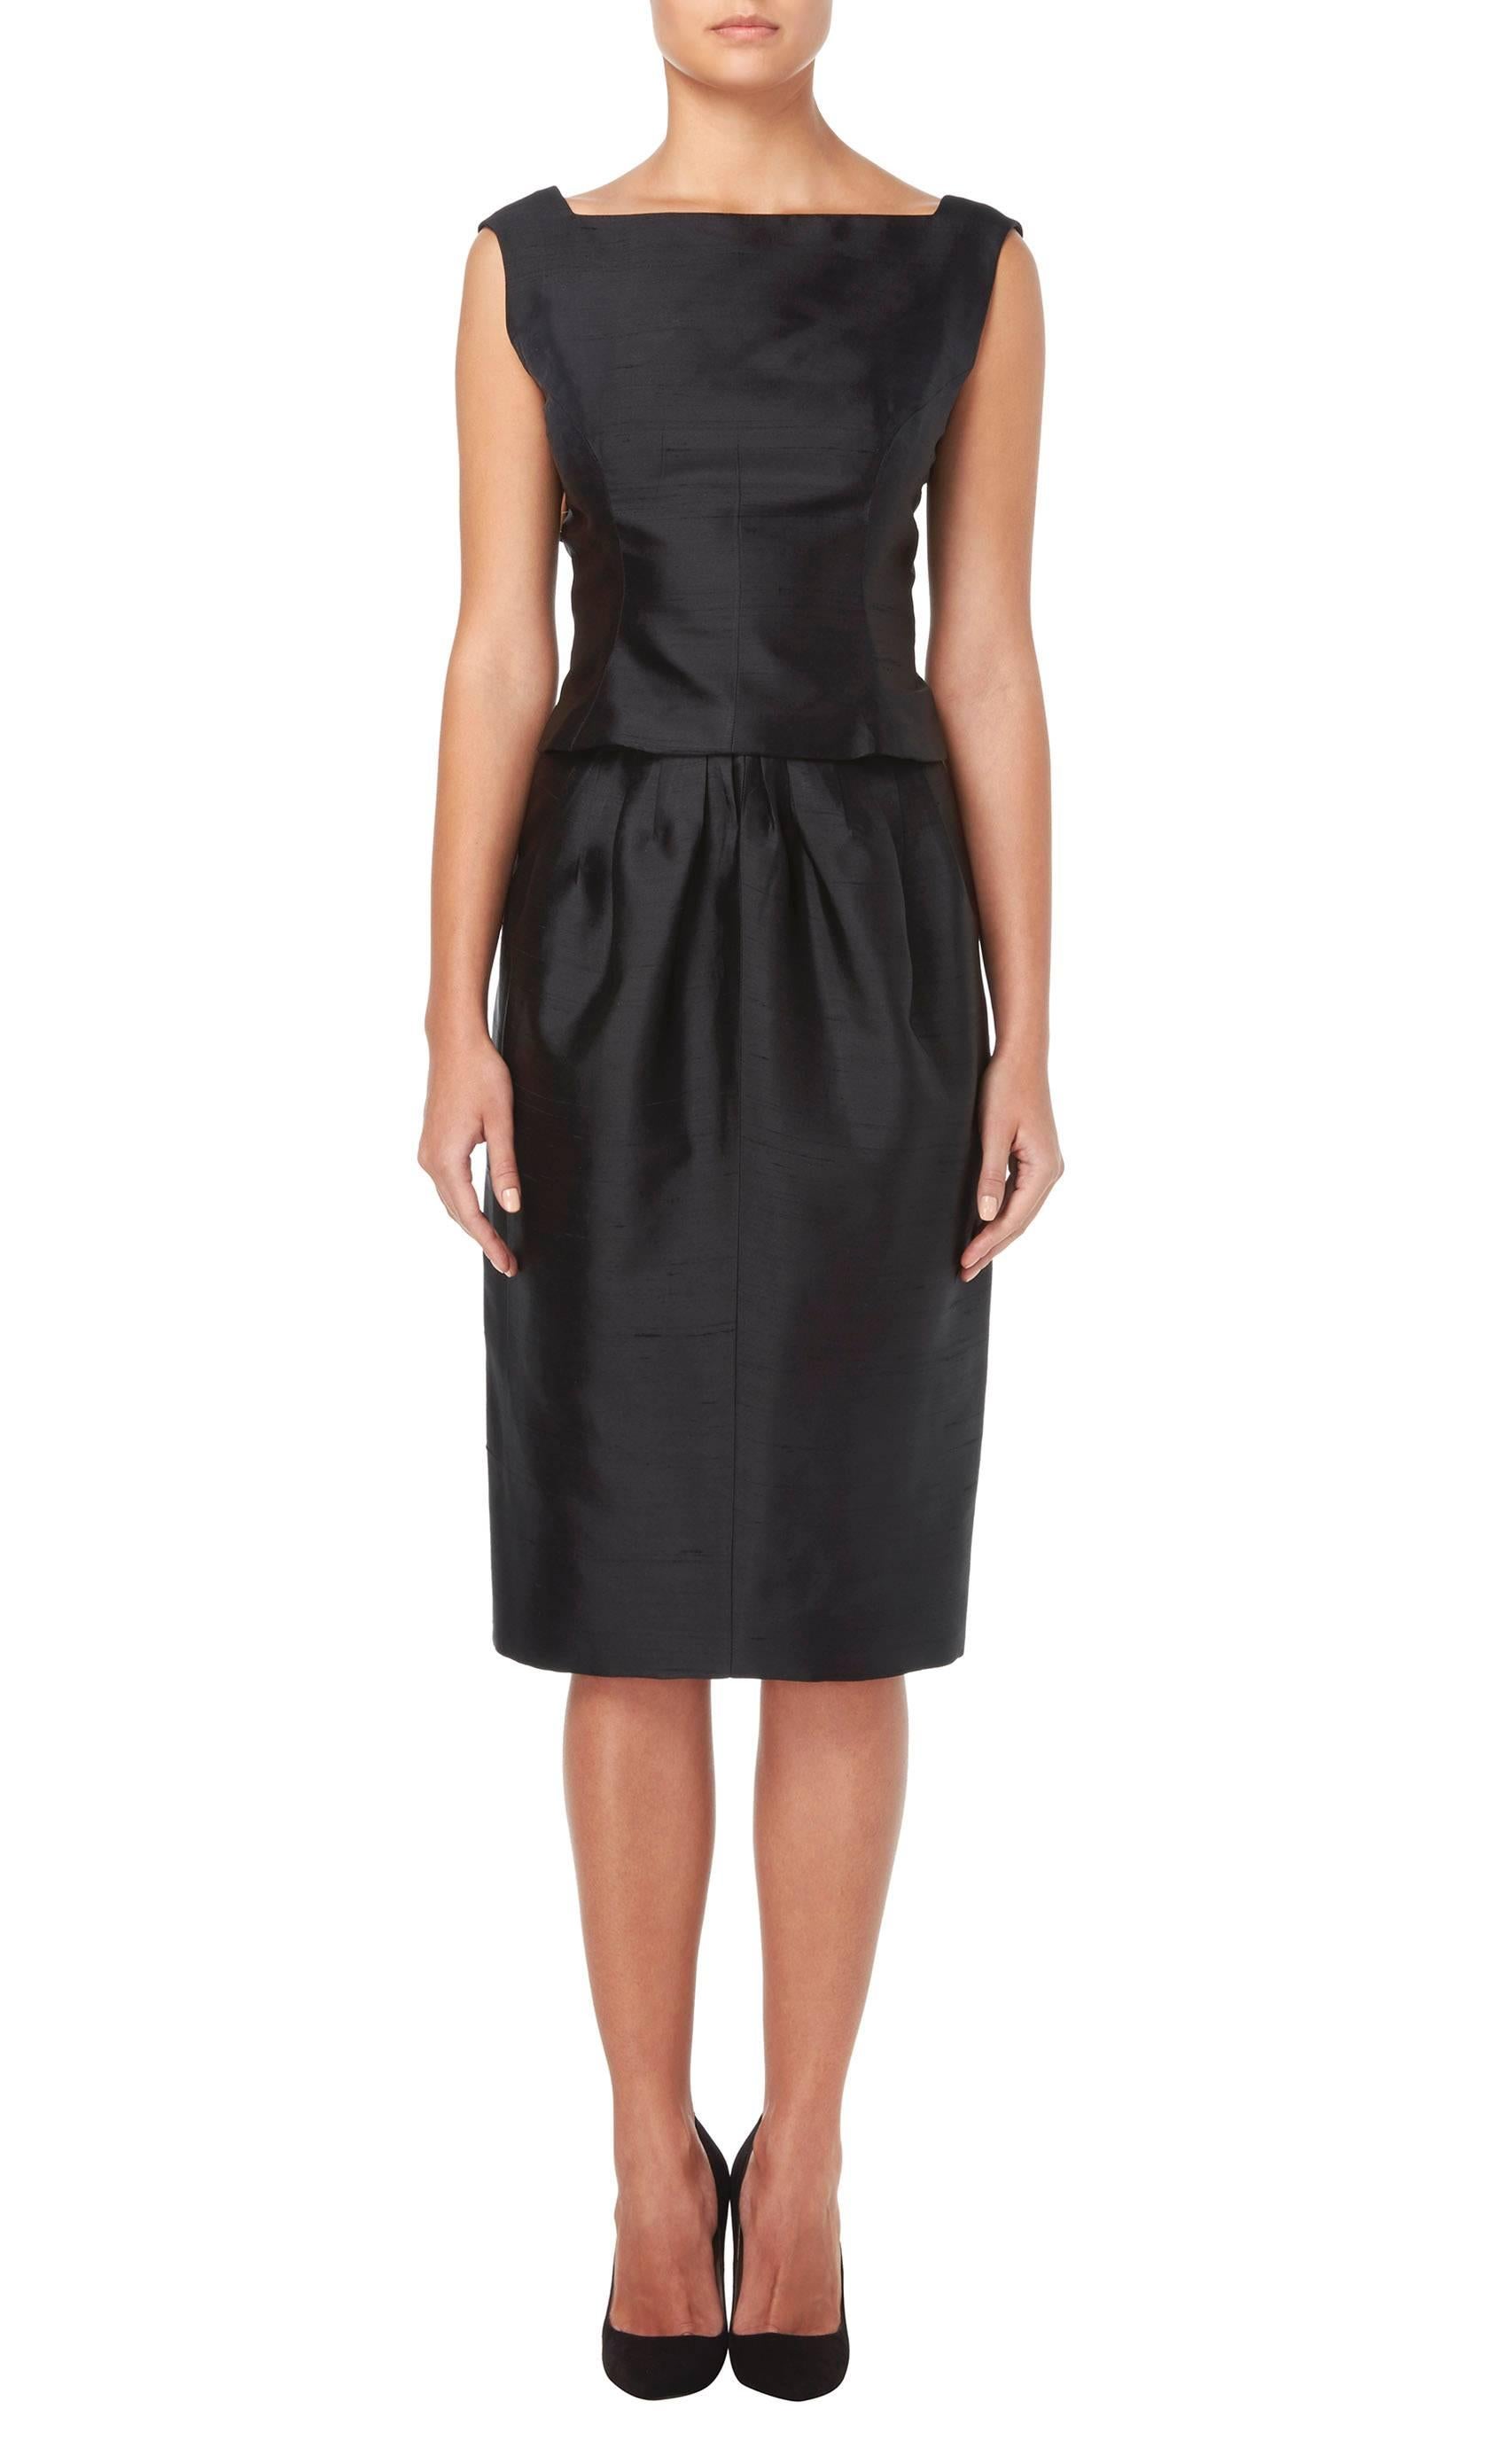 This timeless Jean Patou haute couture LBD is a fantastic investment piece. Constructed in black silk and giving the illusion of a separate top and skirt, the dress fastens to the back with a concealed zip and fabric-matched buttons.

Constructed